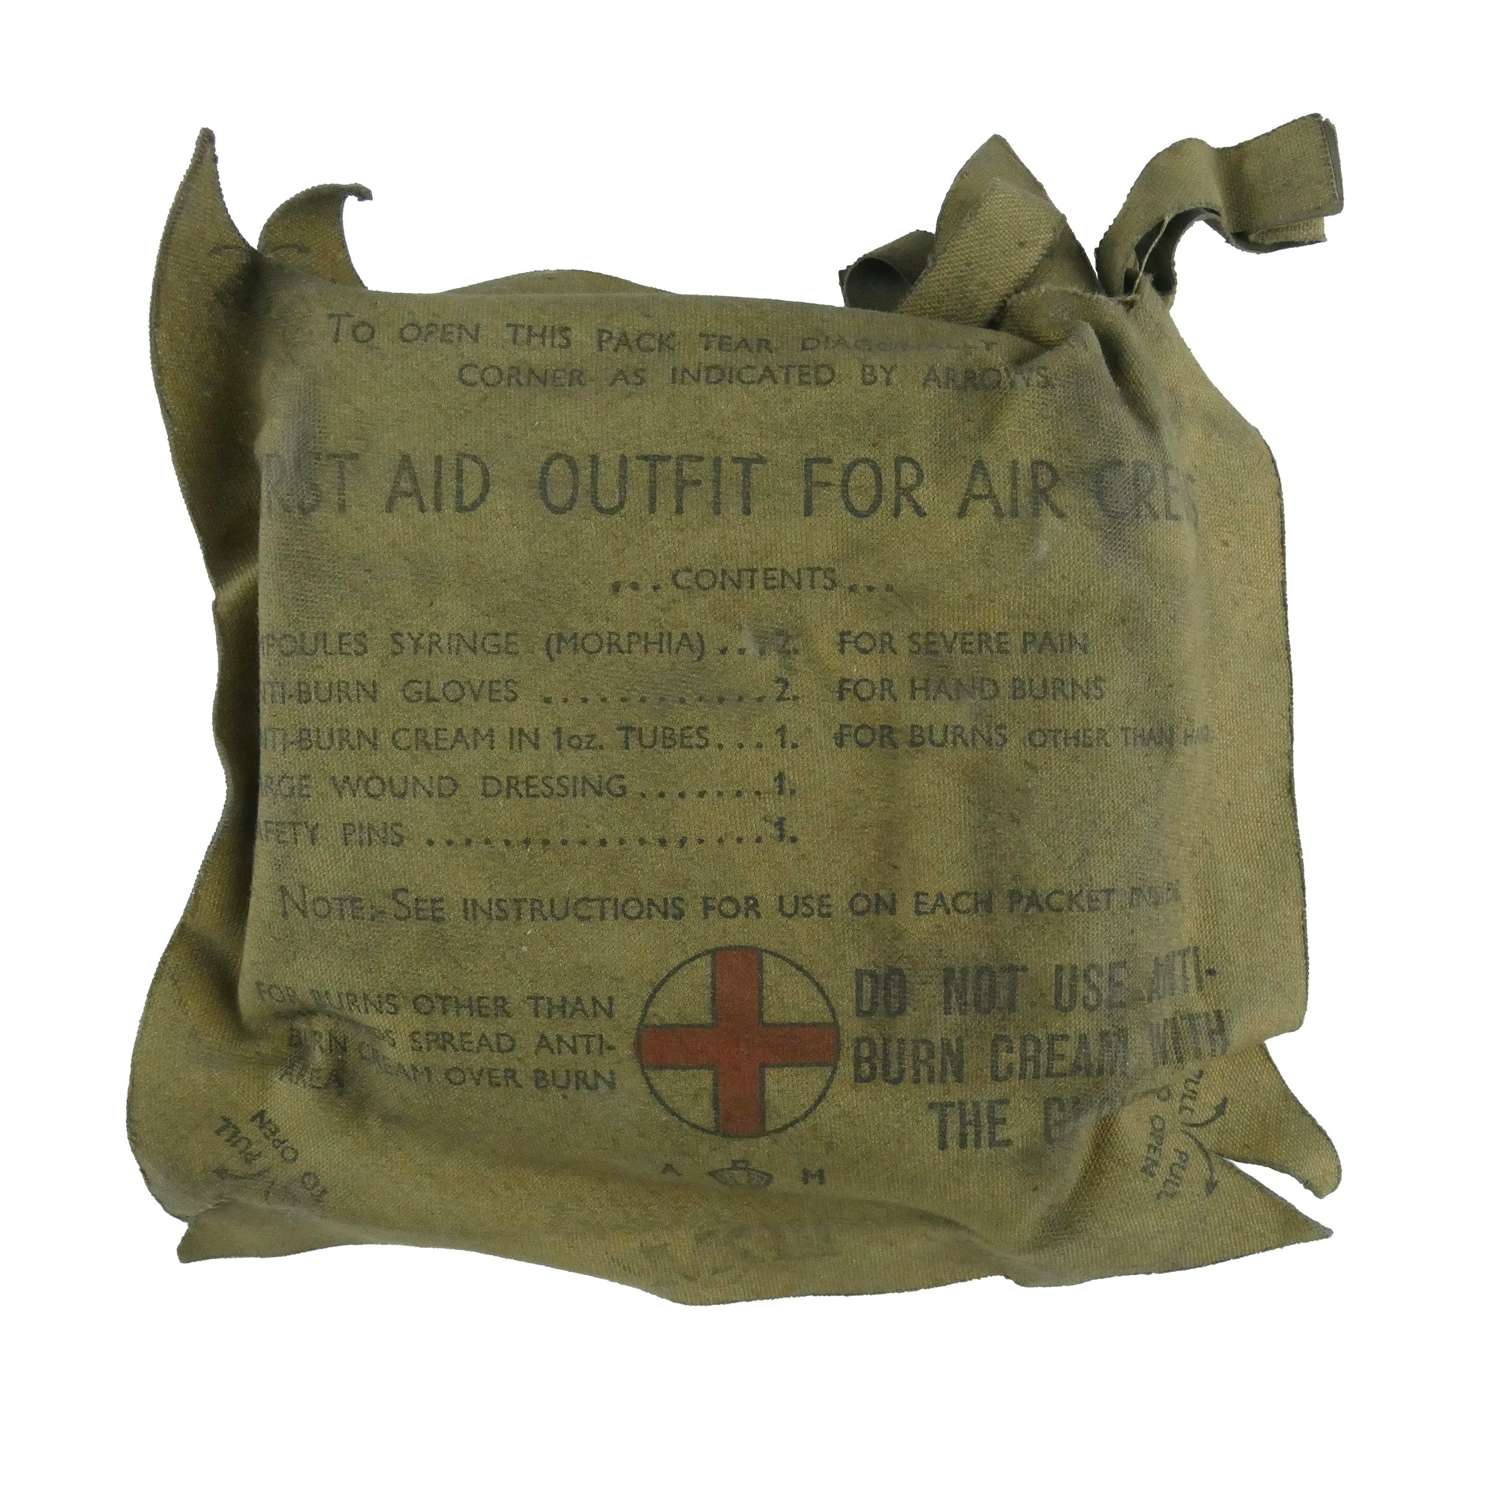 RAF First Aid Outfit For Aircrews, Mk.III - history